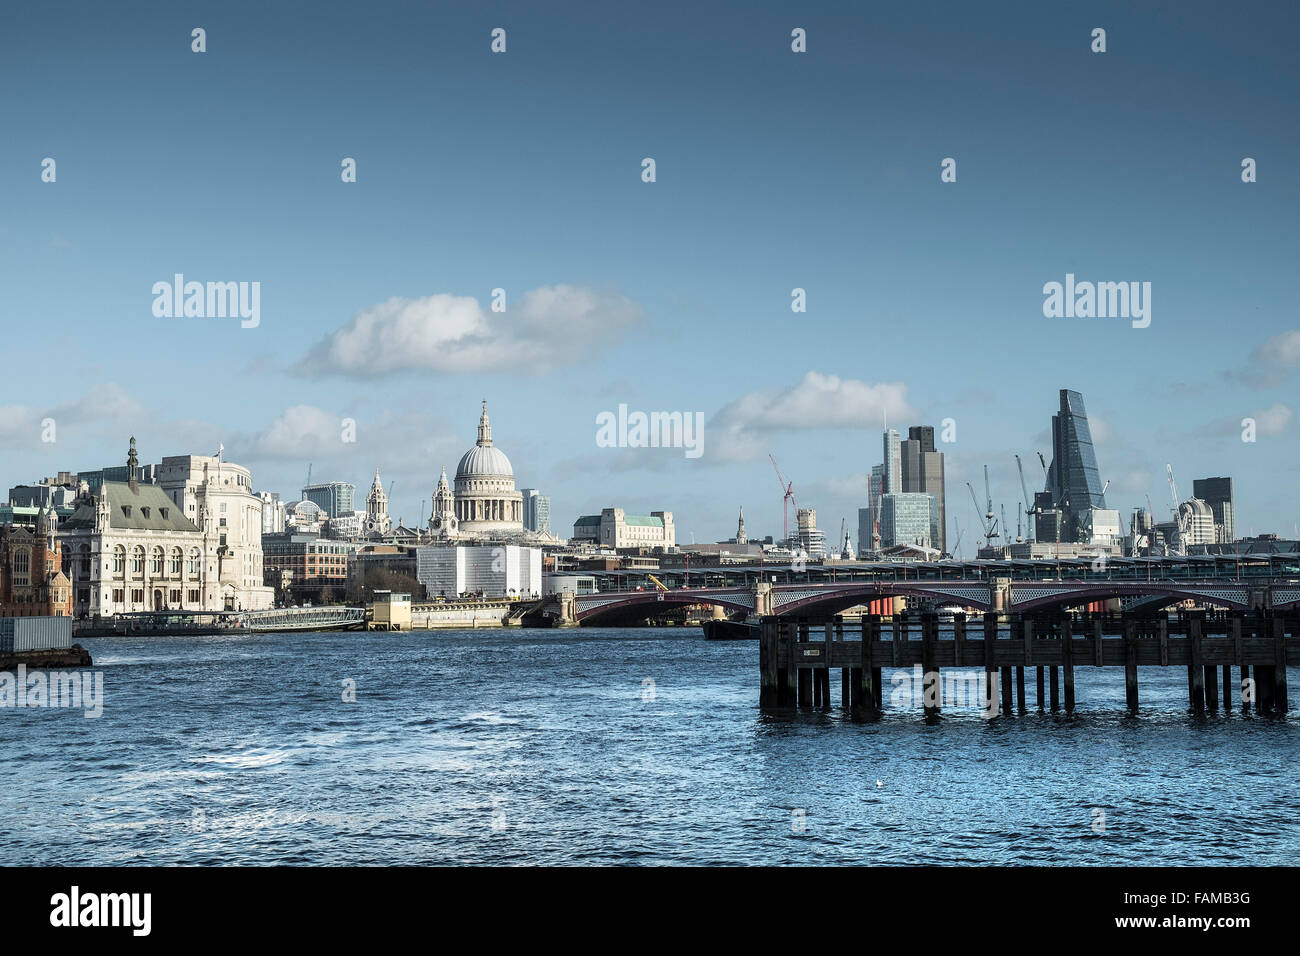 The River Thames in London. Stock Photo